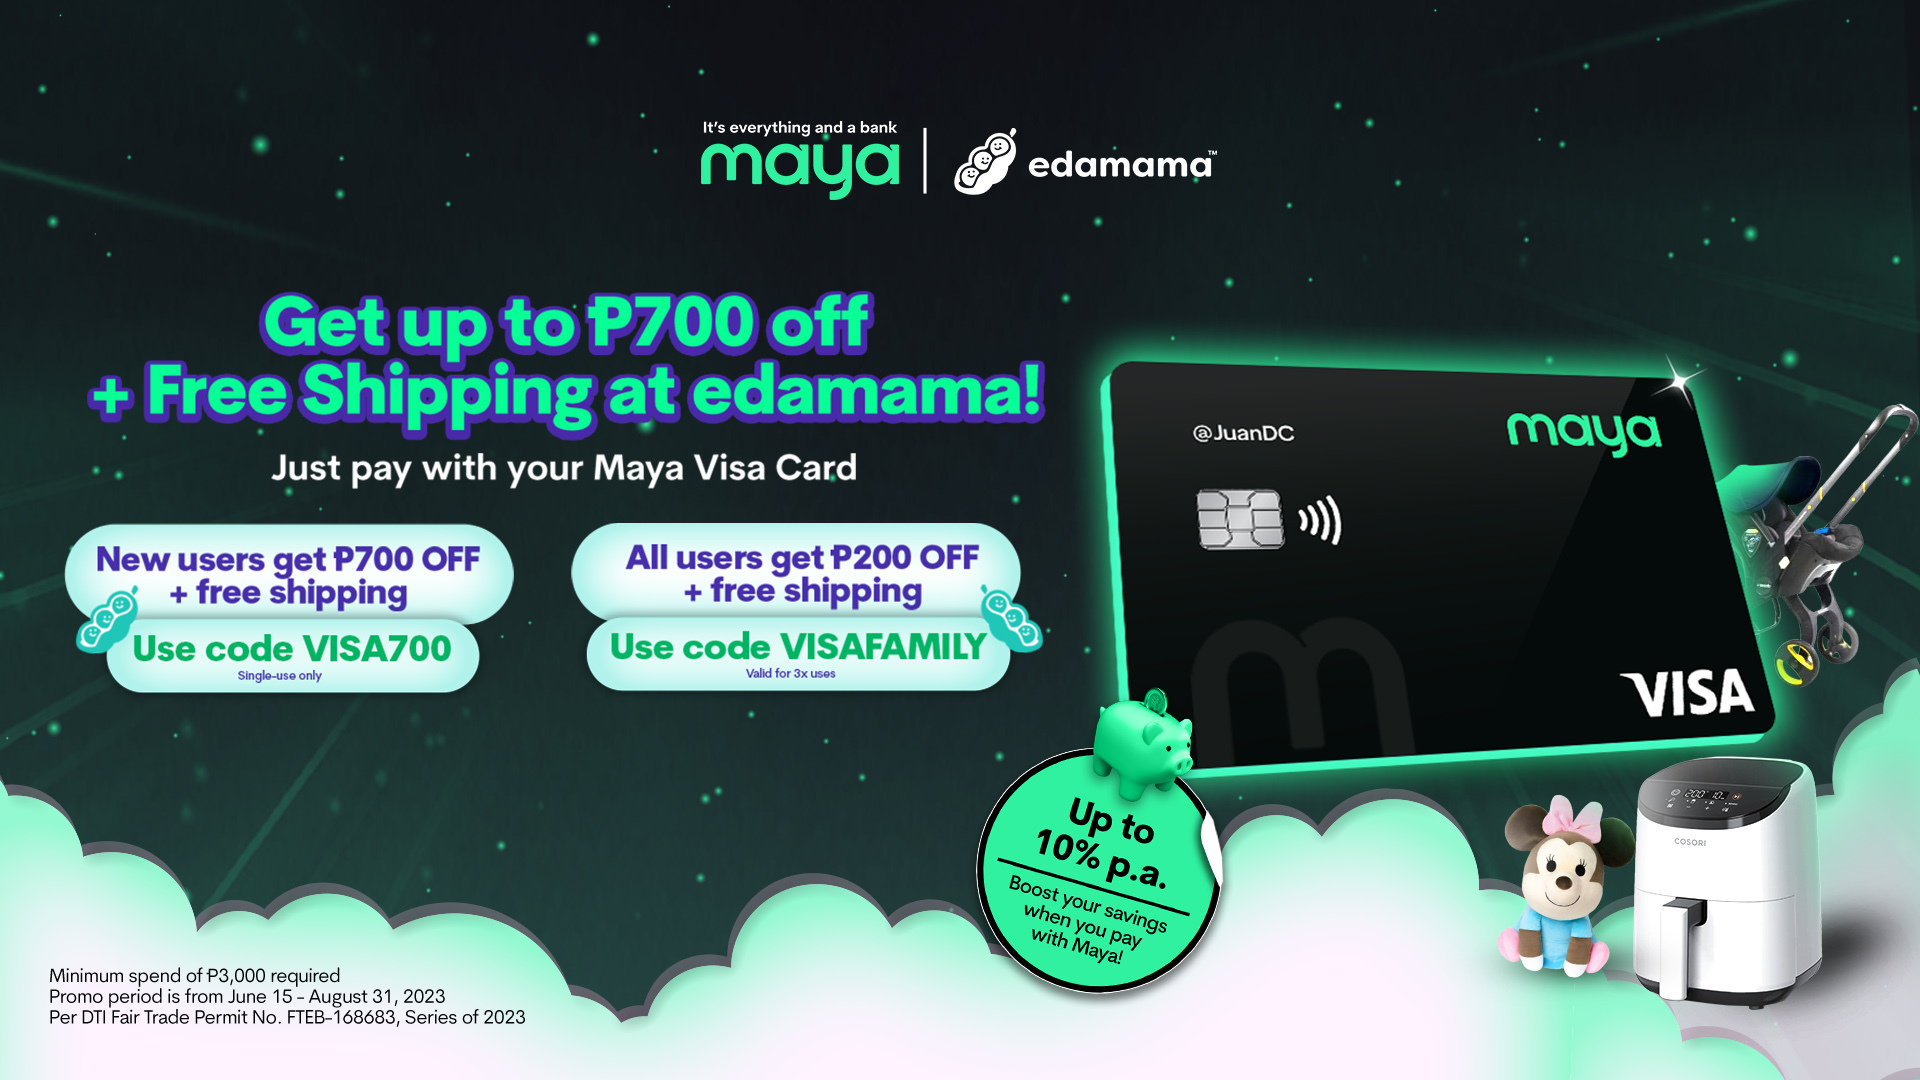 Get up to P700 Off + Free Shipping with Edamama!